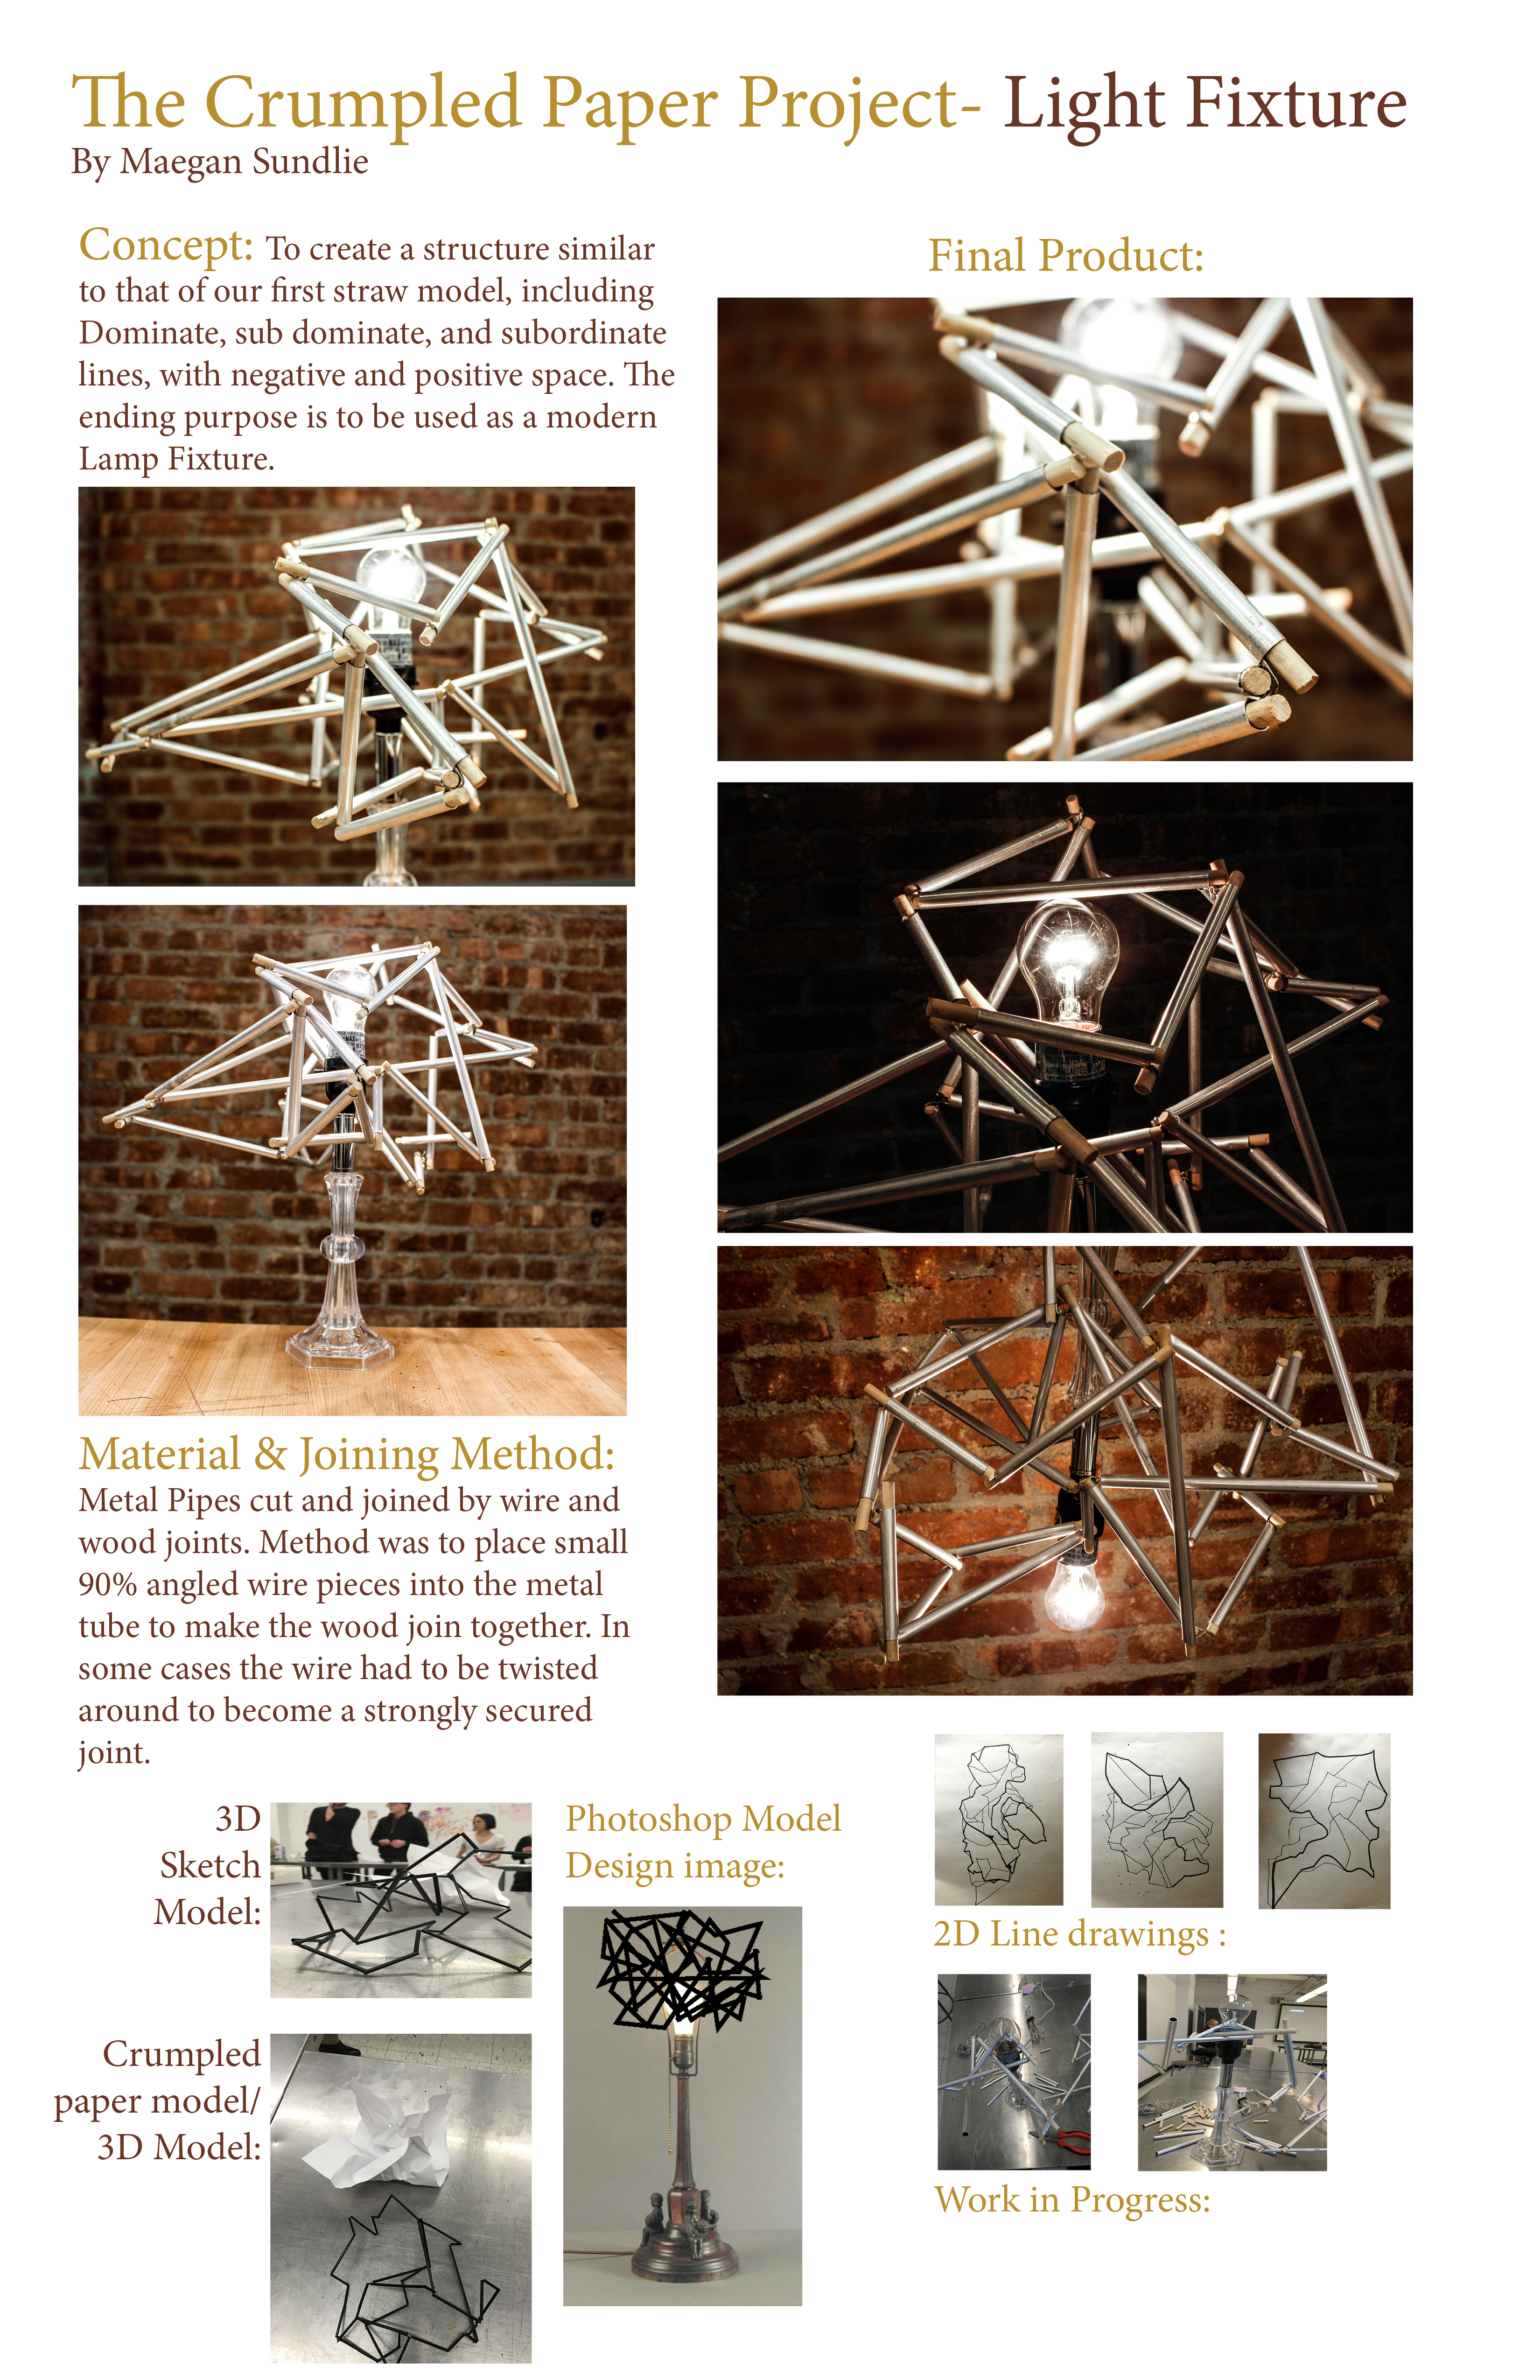 The crumpled paper project-Light fixture